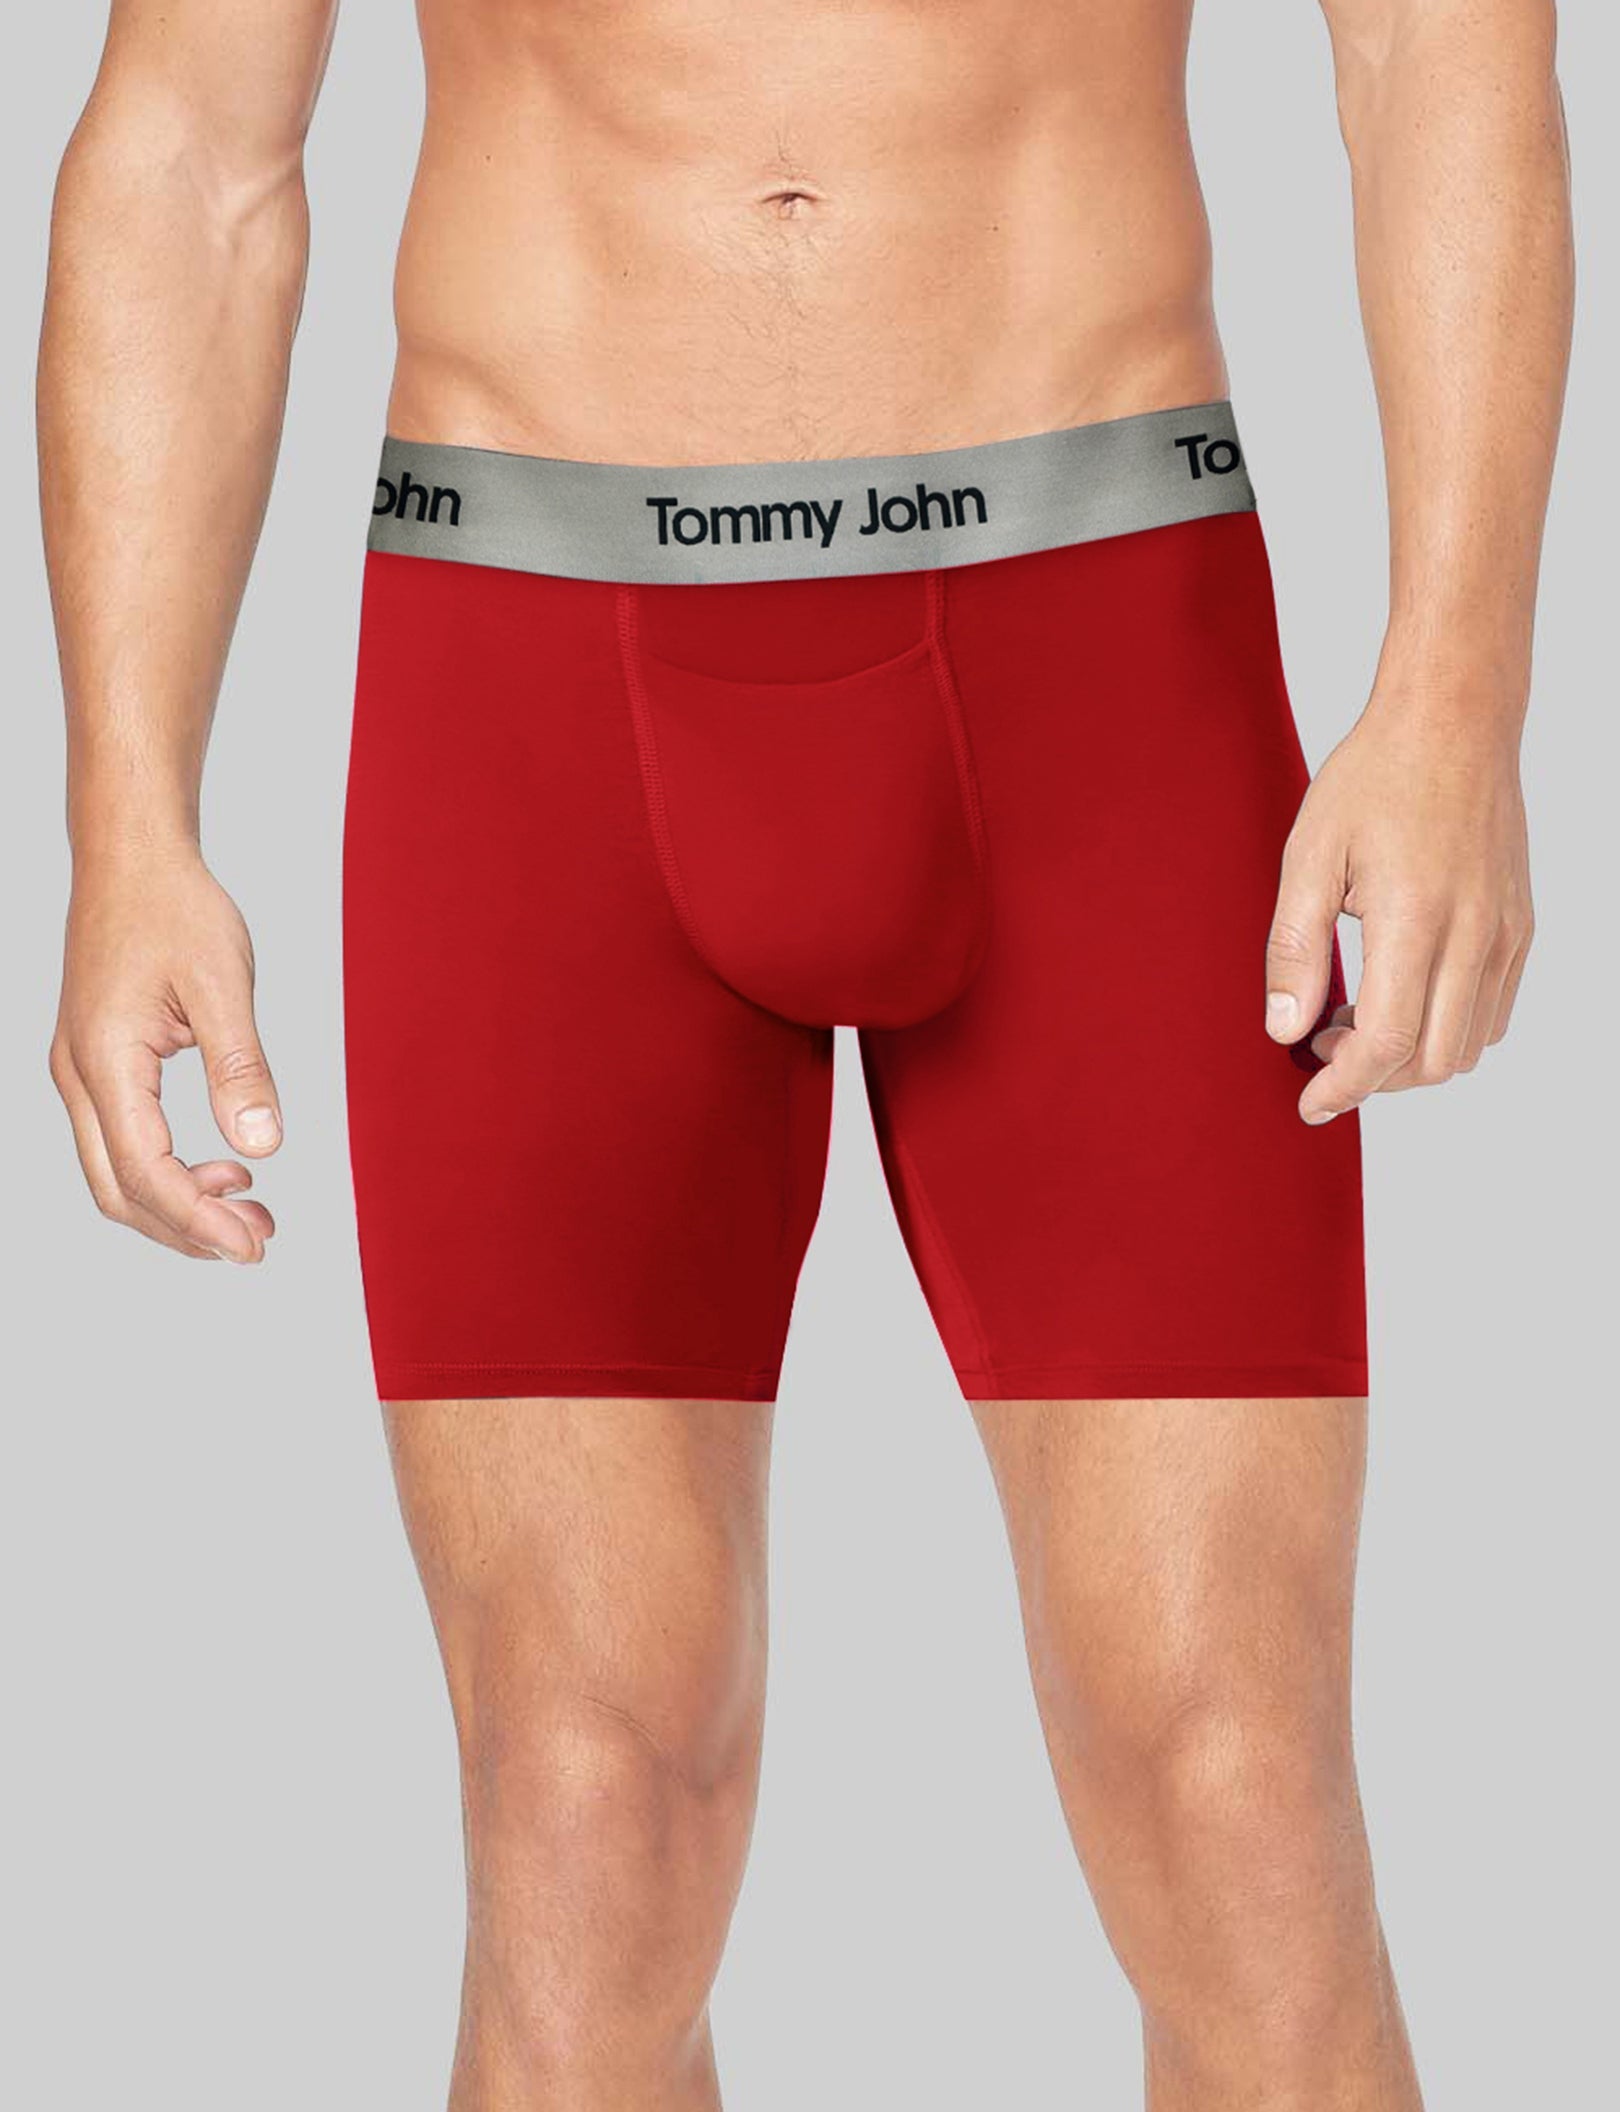 Second Skin Hammock Pouch™ Mid-Length Boxer Brief 6 (6-Pack) – Tommy John